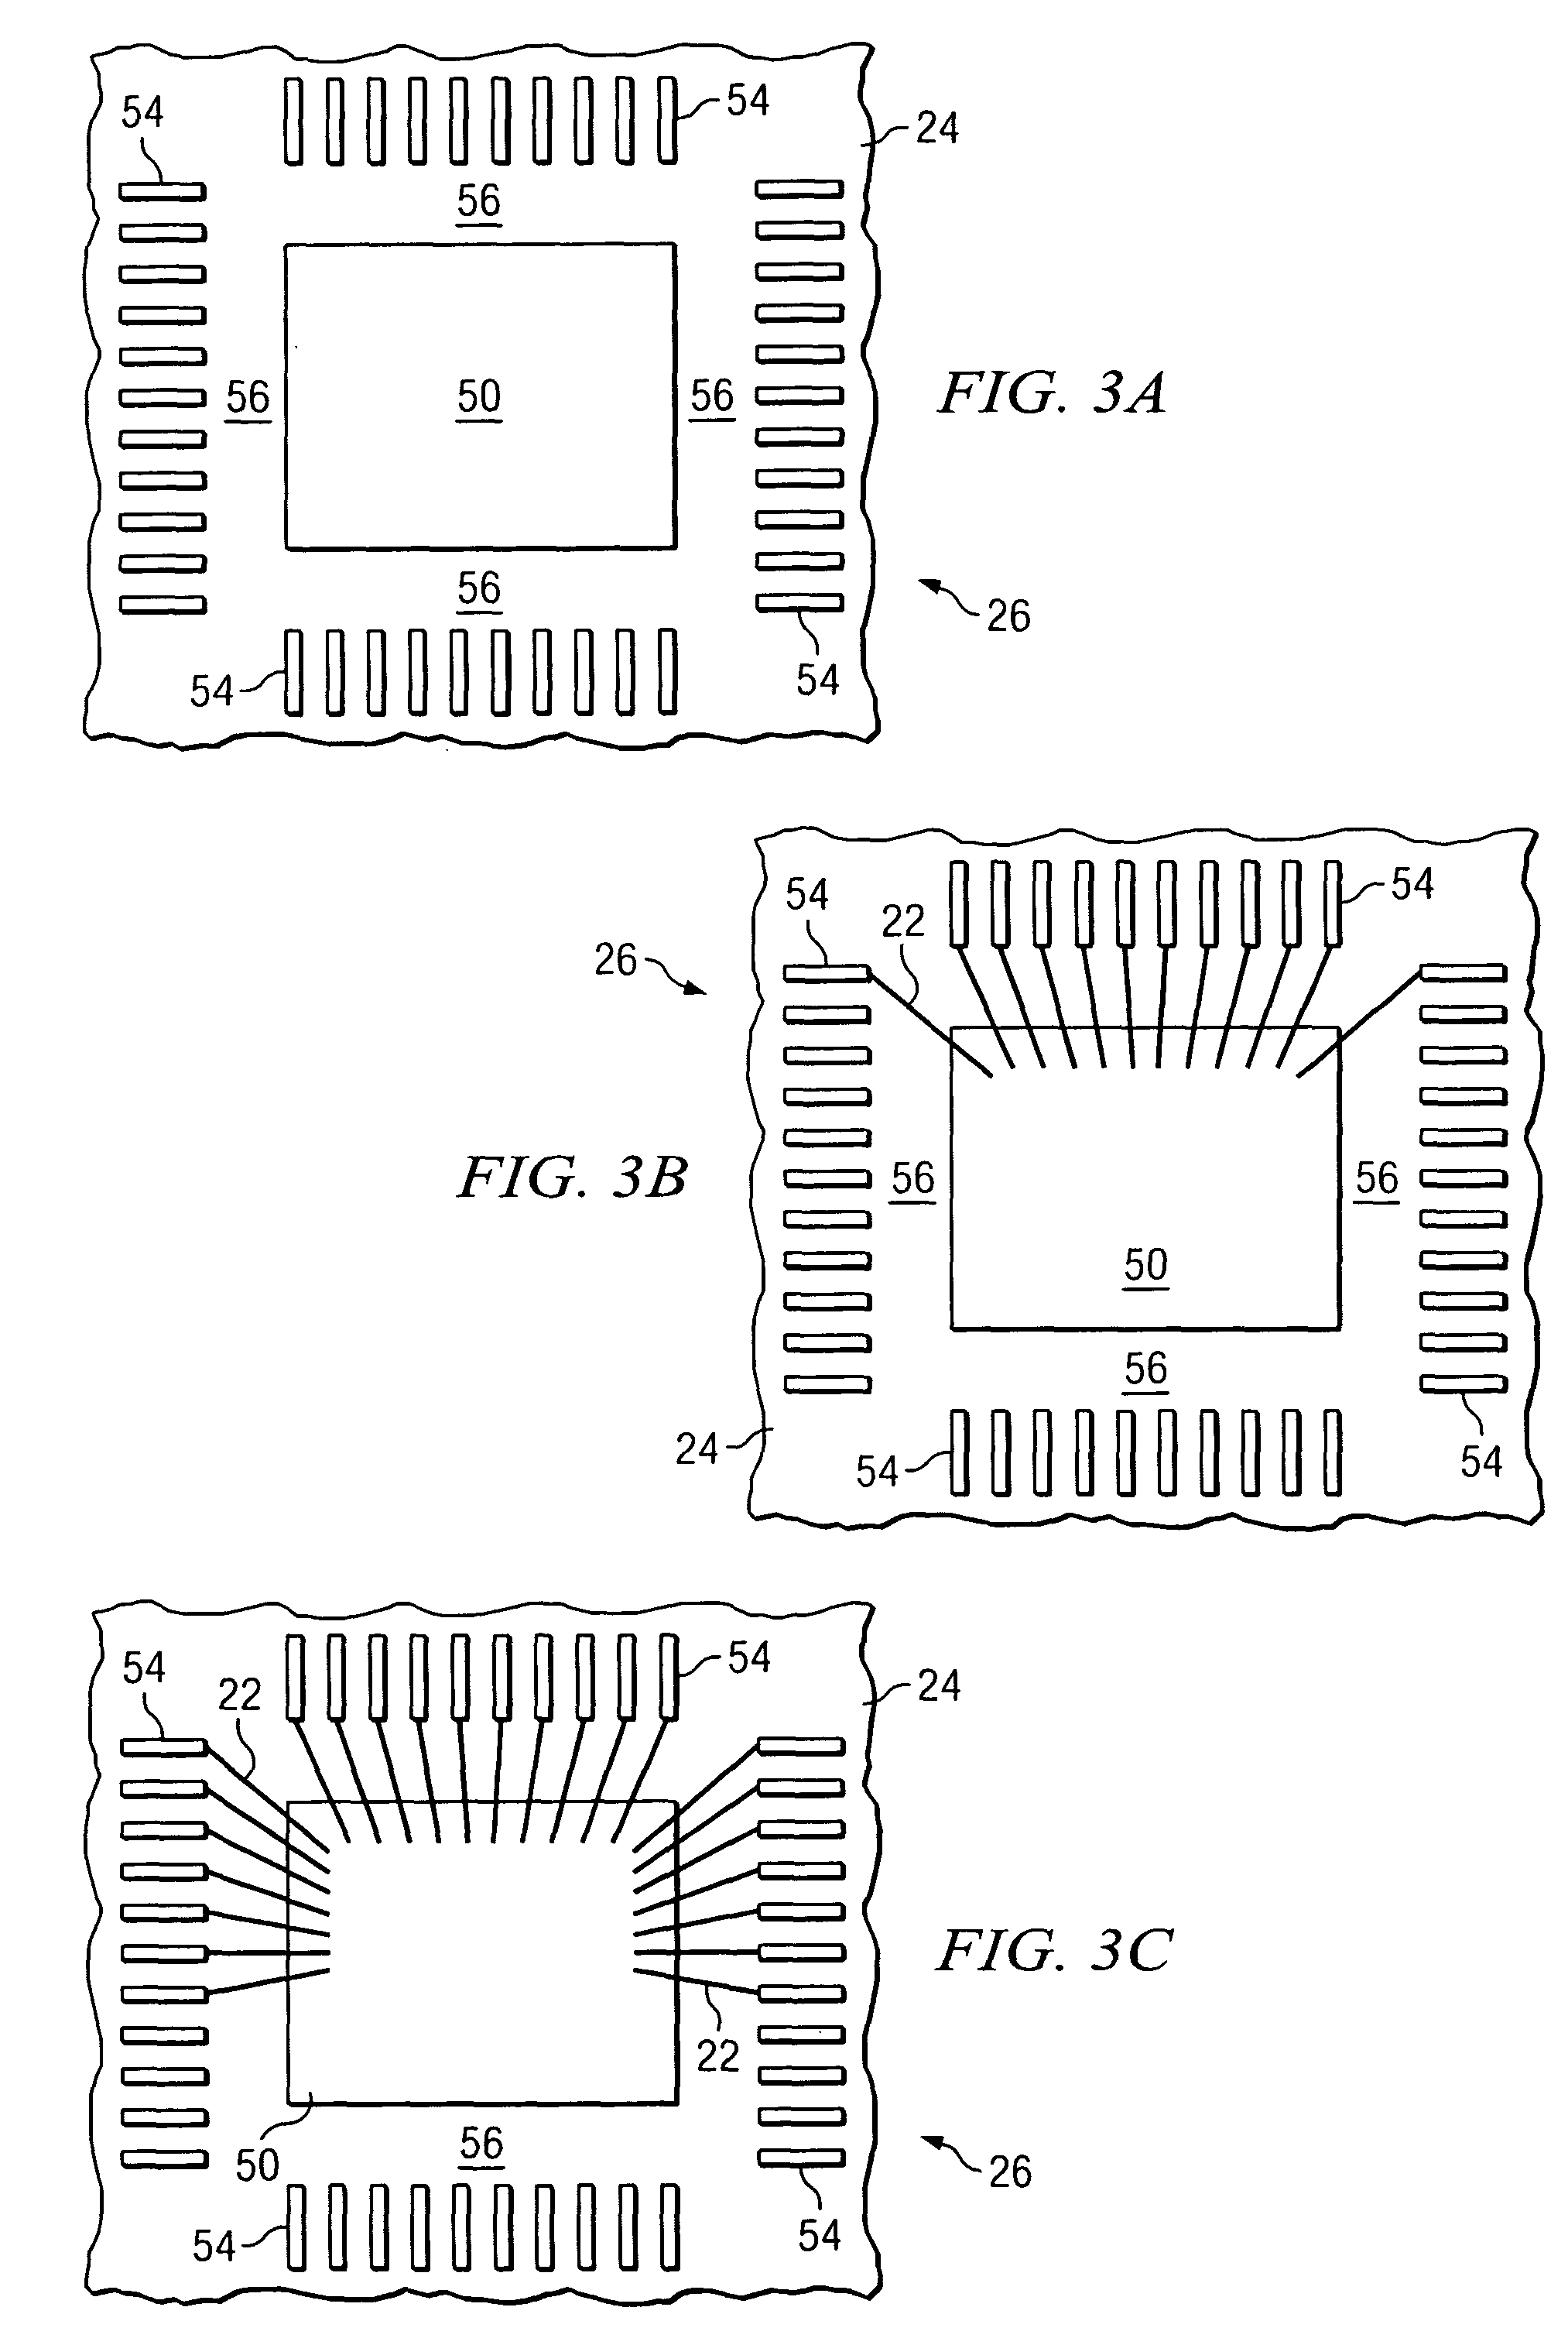 Printing one or more electrically conductive bonding lines to provide electrical conductivity in a circuit